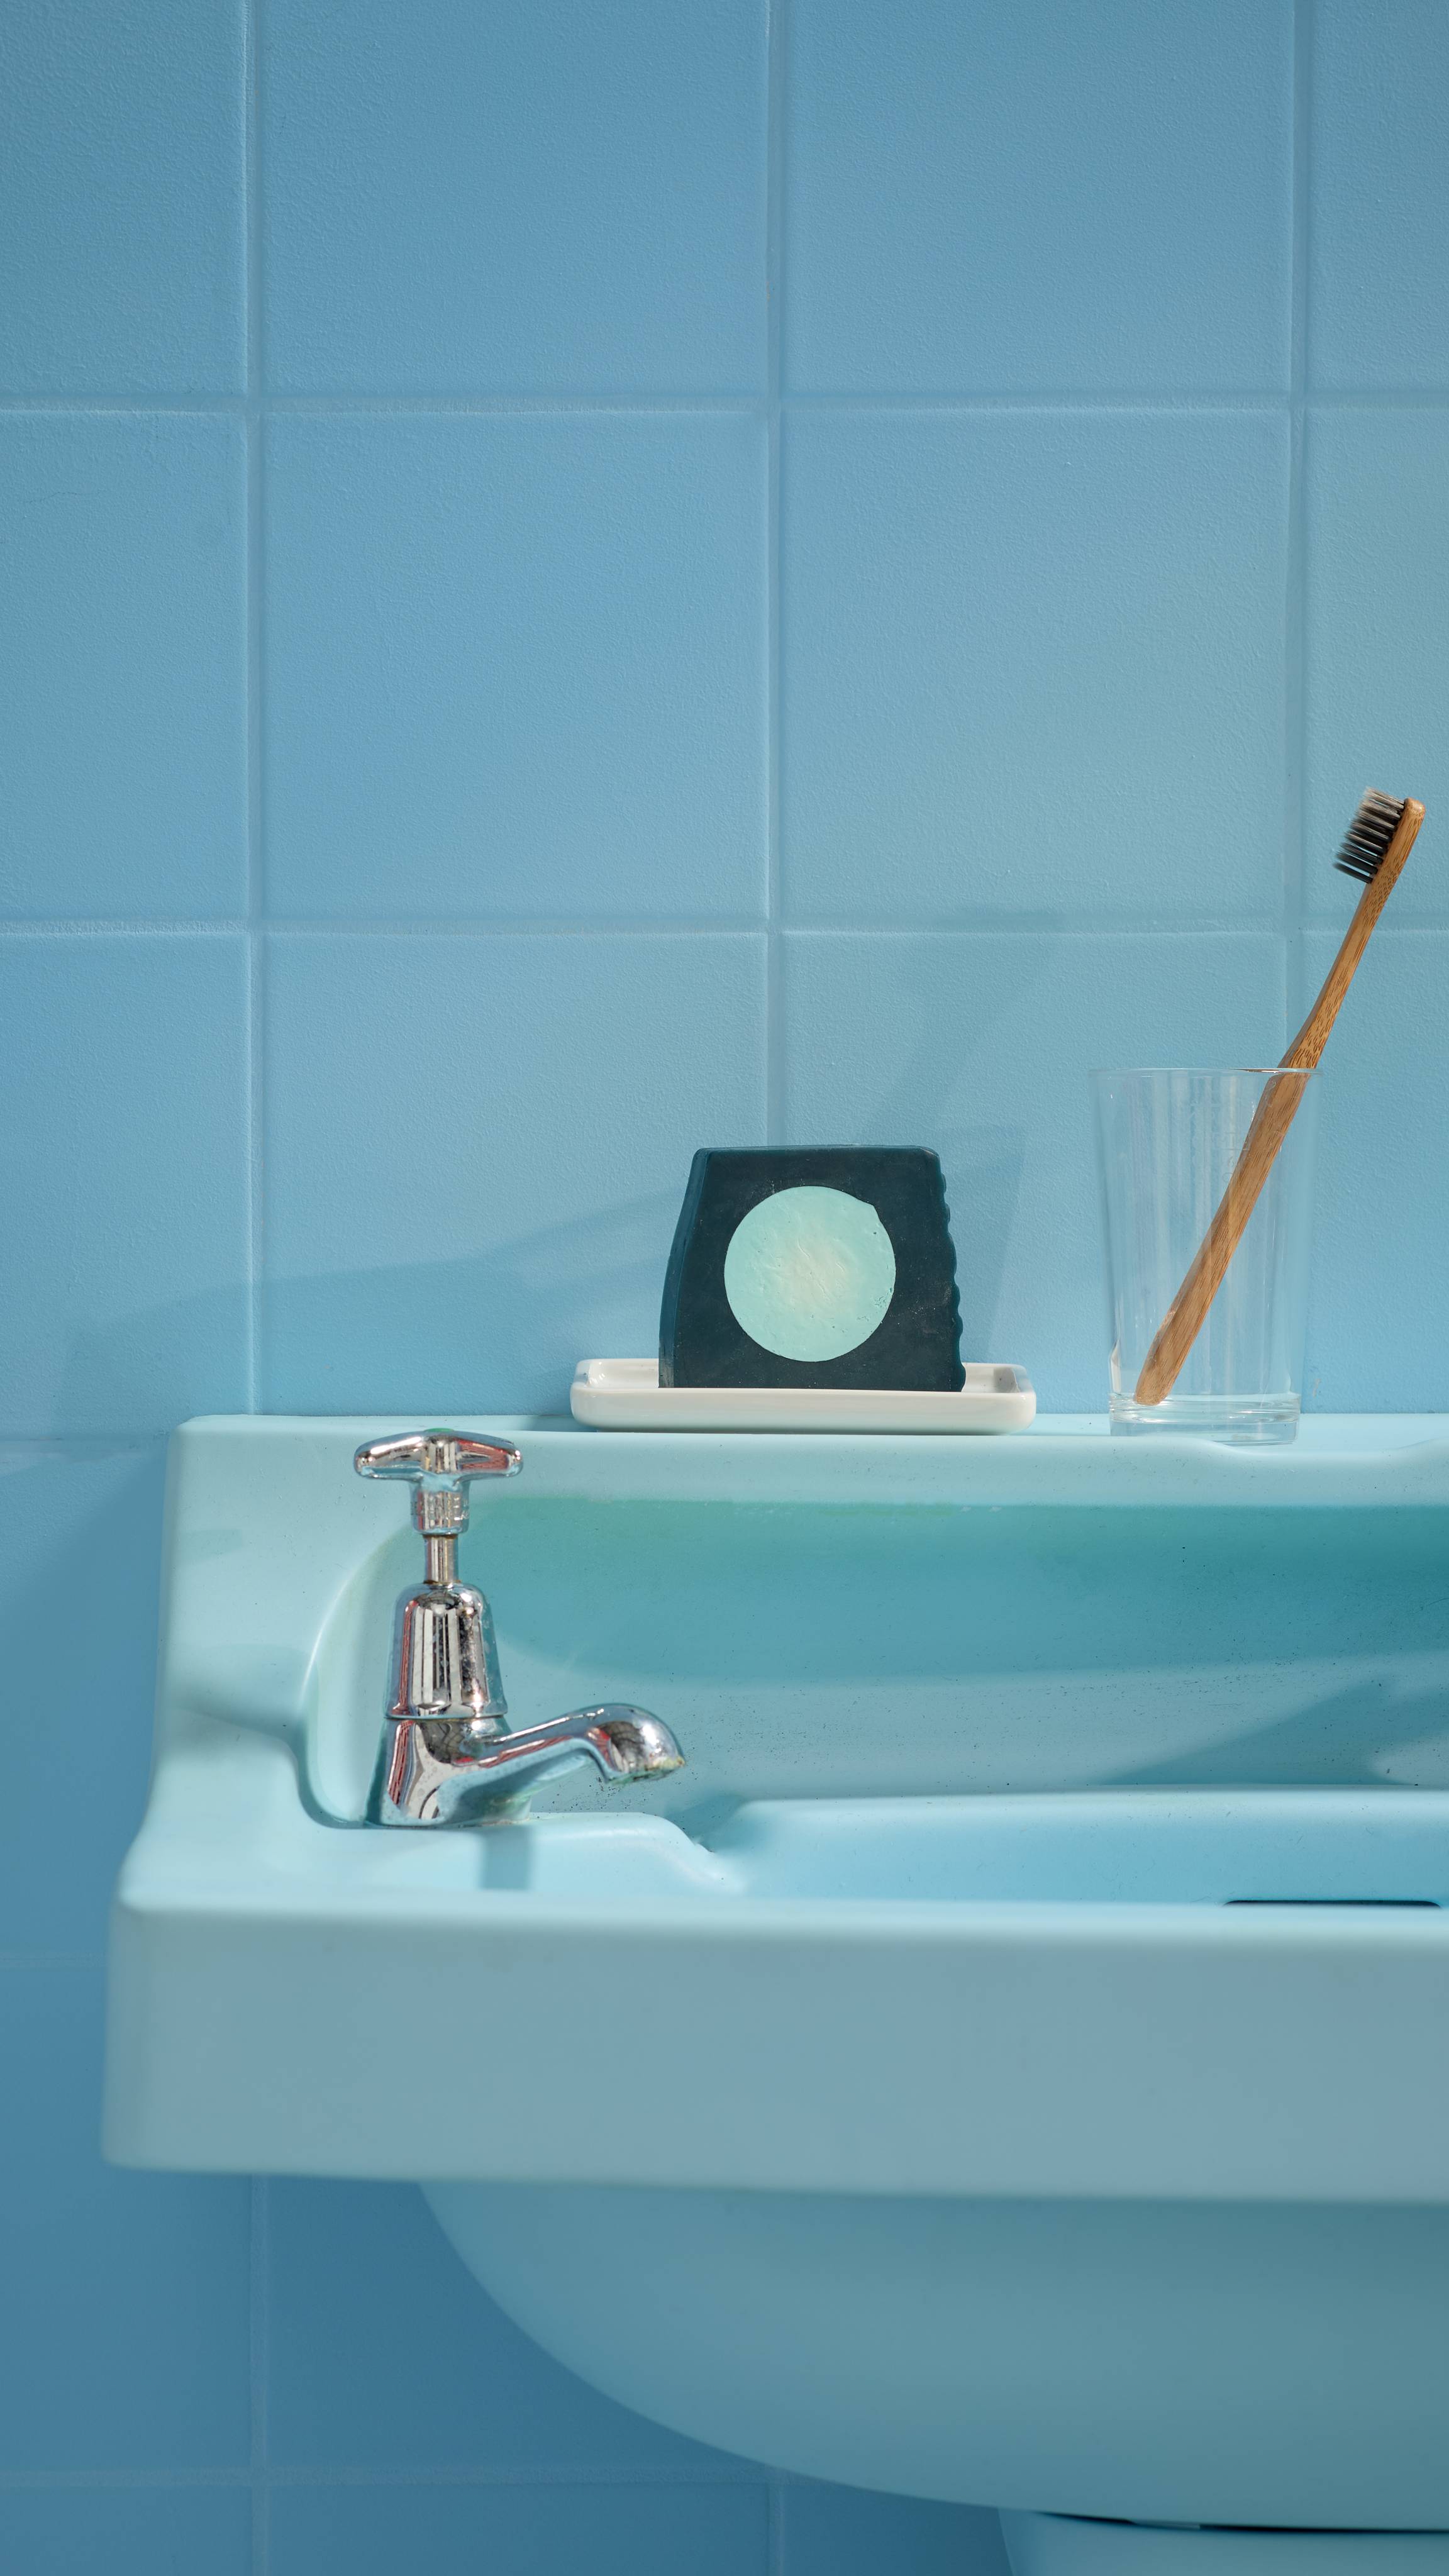 The image shows a blue, tiled bathroom with a matching blue sink. The Blue Moon soap is sitting on the side of the sink on a white soap dish. 